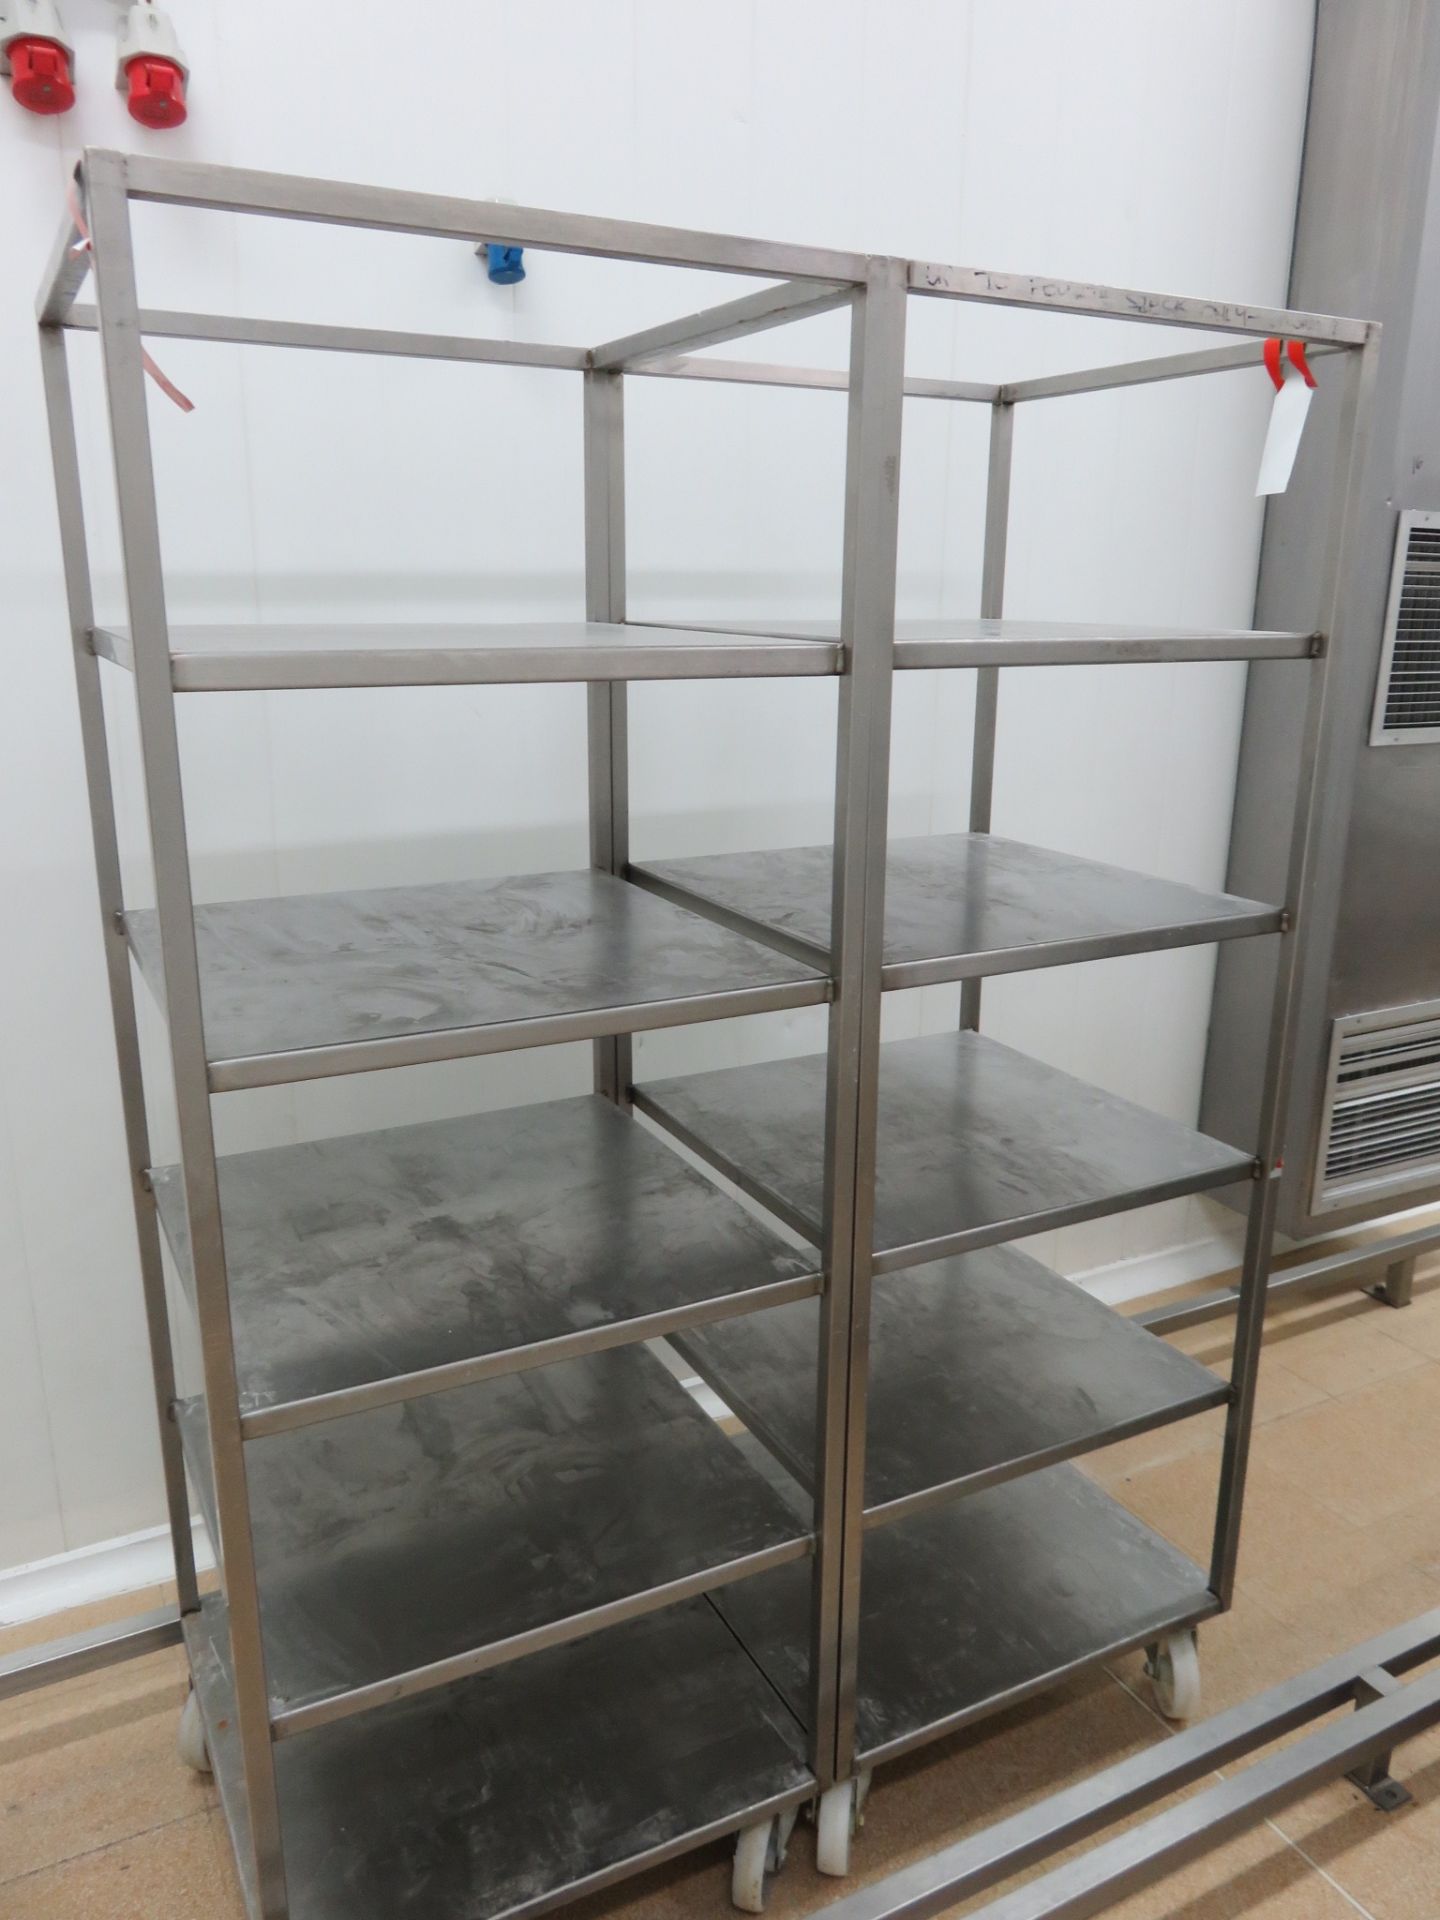 2 x S/s mobile trollies with 5 shelves. Approx. 600mm x 600mm x 1800mm high. Lift Out £10